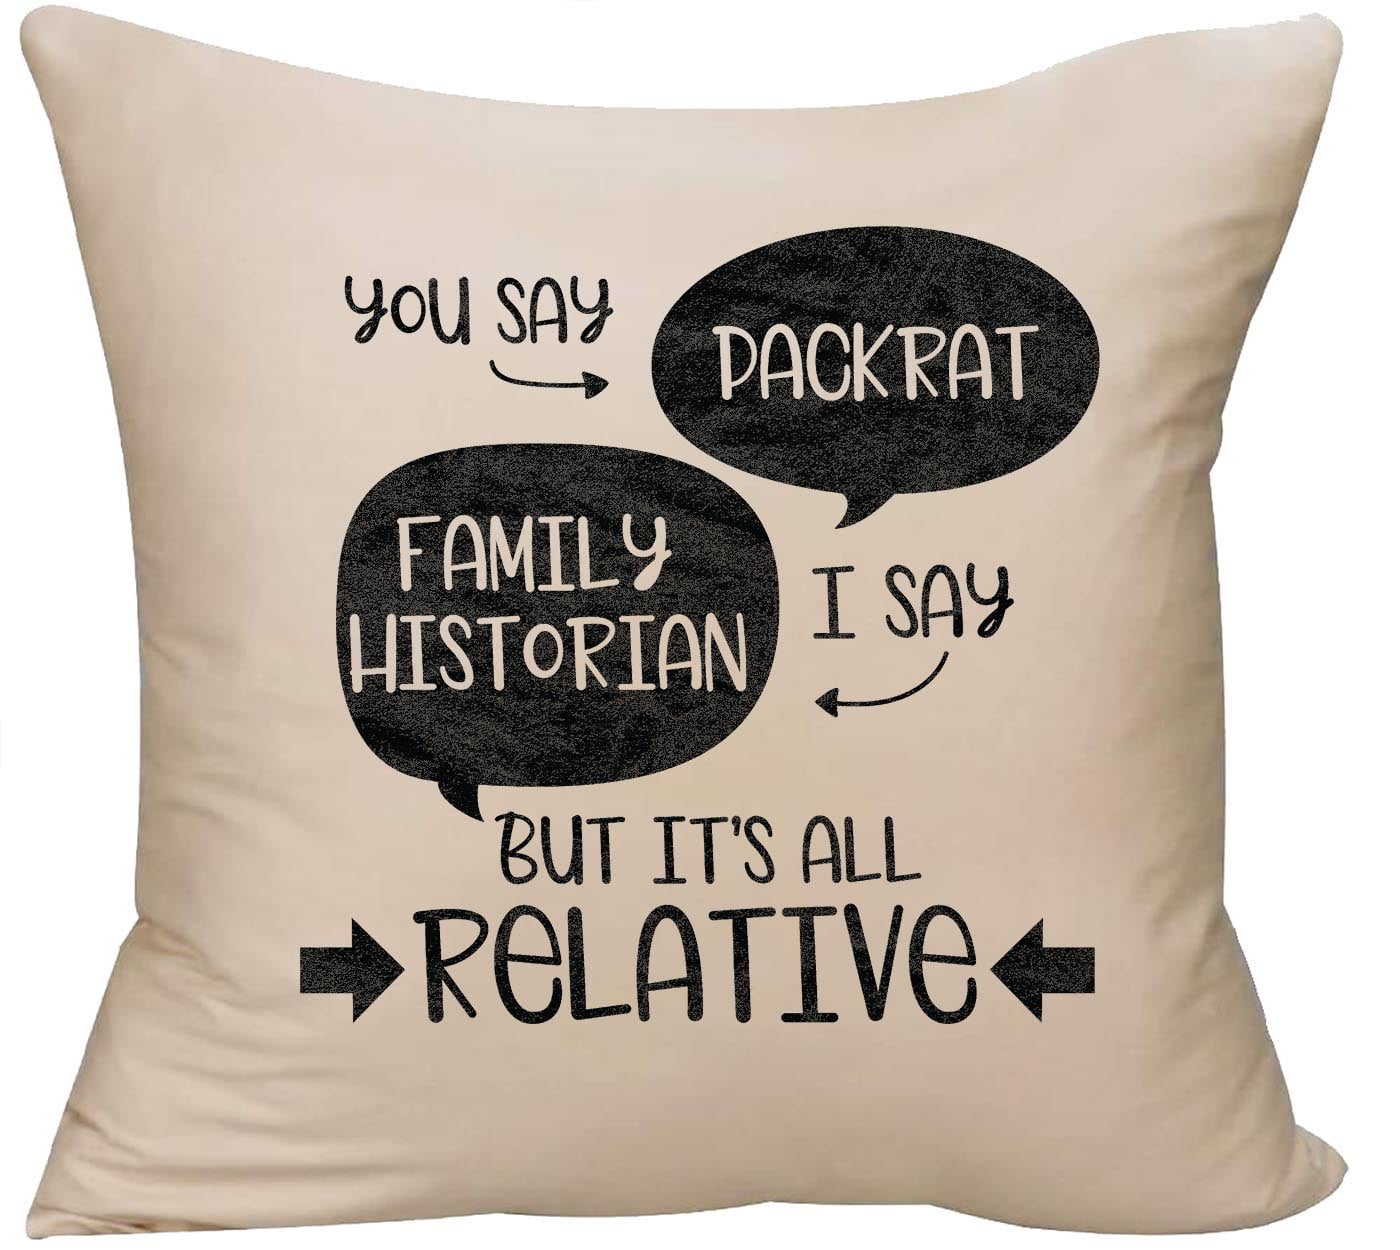 Funny Romantic Gifts & More Adult Jokes Romance Erotic Funny Gift Throw Pillow Multicolor 16x16